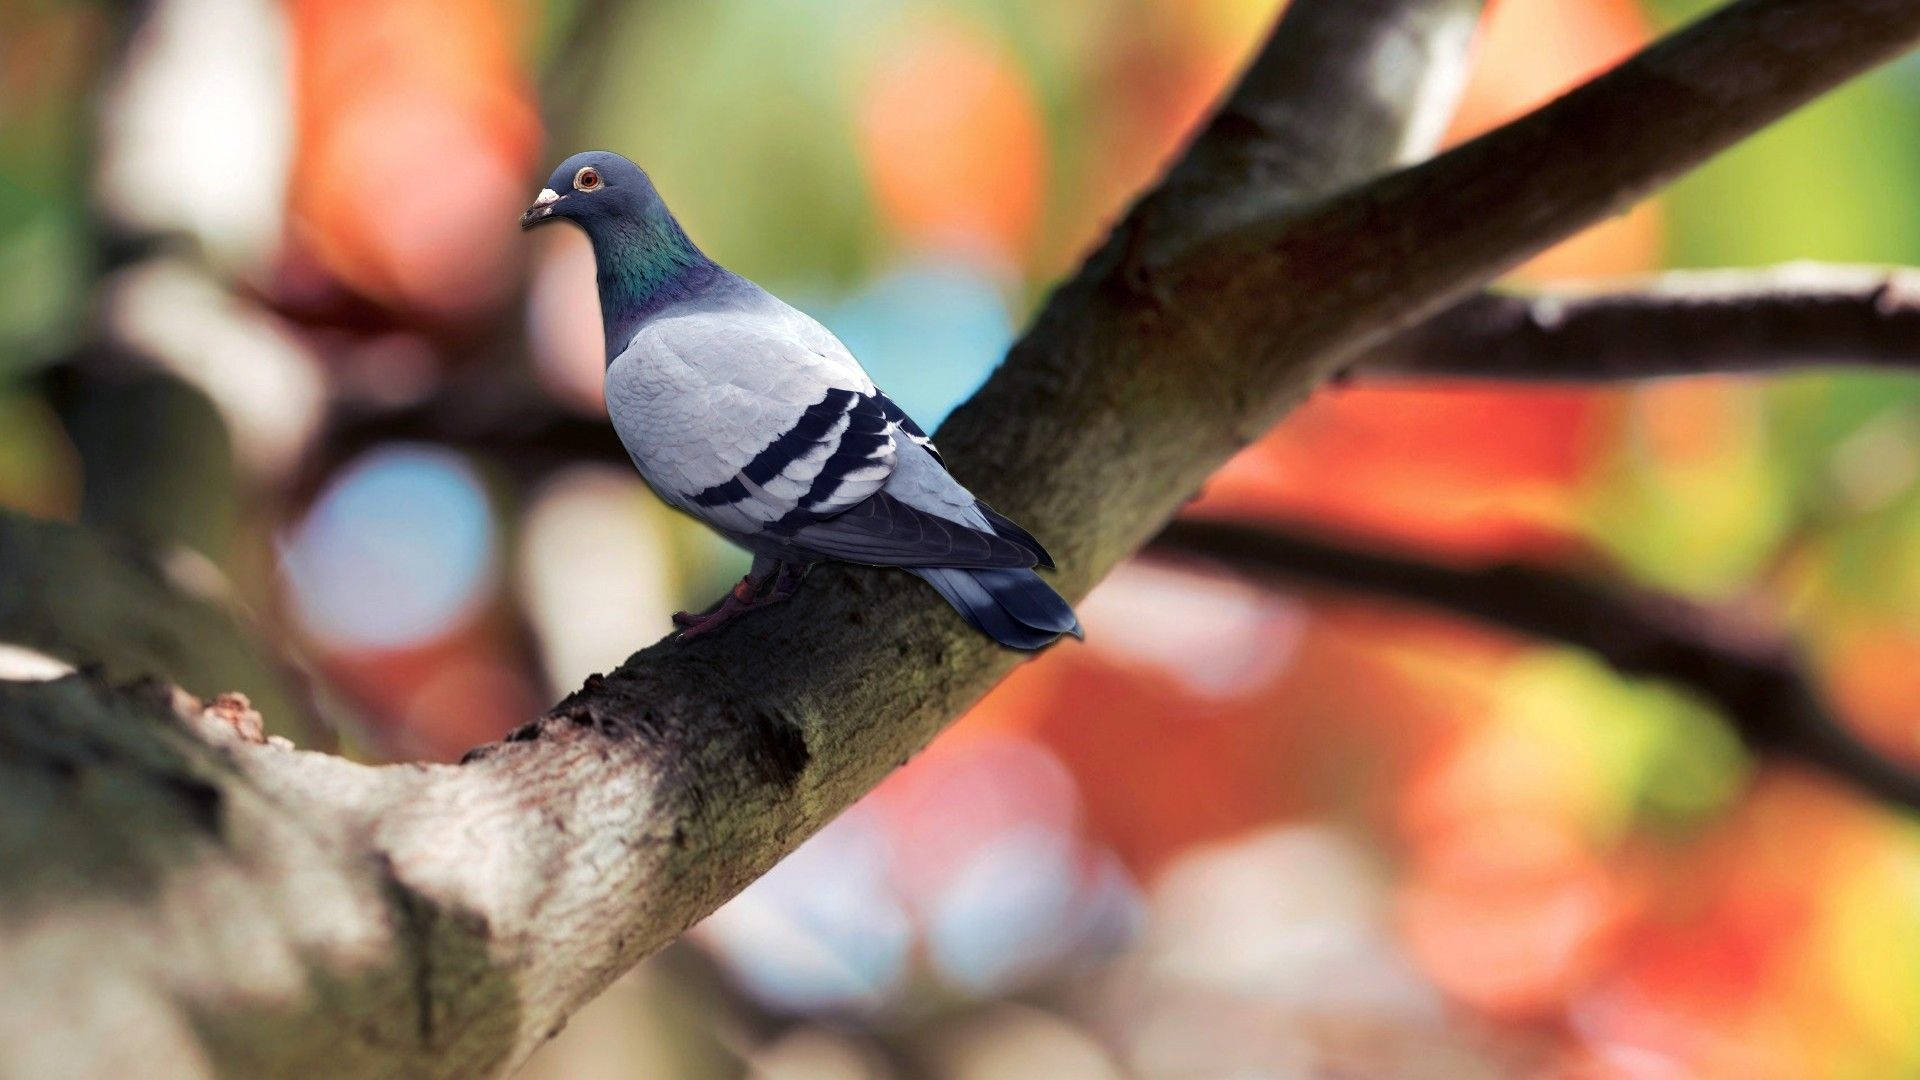 Free Pigeon Wallpaper Downloads, [100+] Pigeon Wallpapers for FREE |  